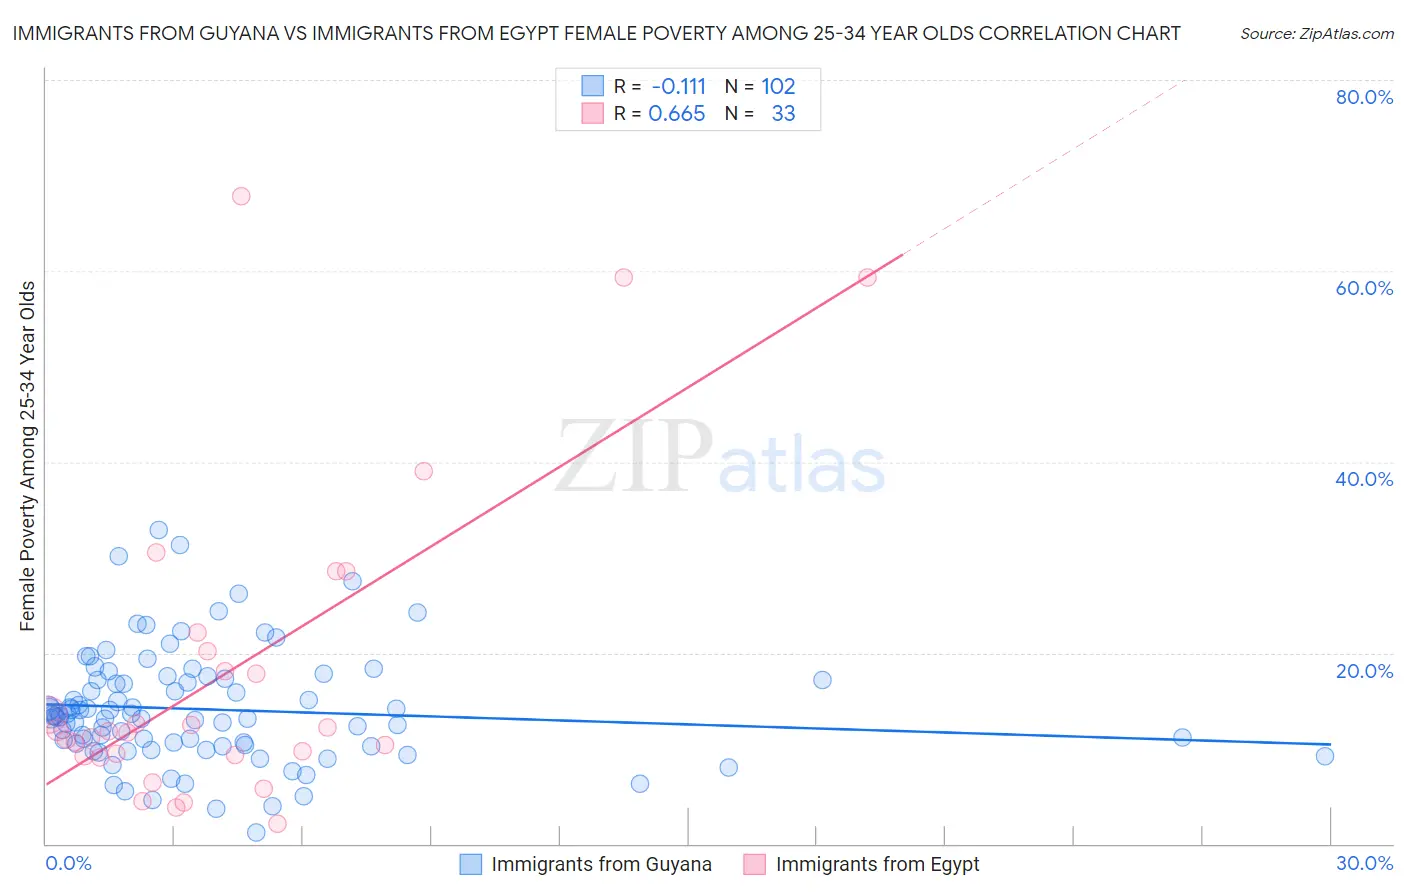 Immigrants from Guyana vs Immigrants from Egypt Female Poverty Among 25-34 Year Olds